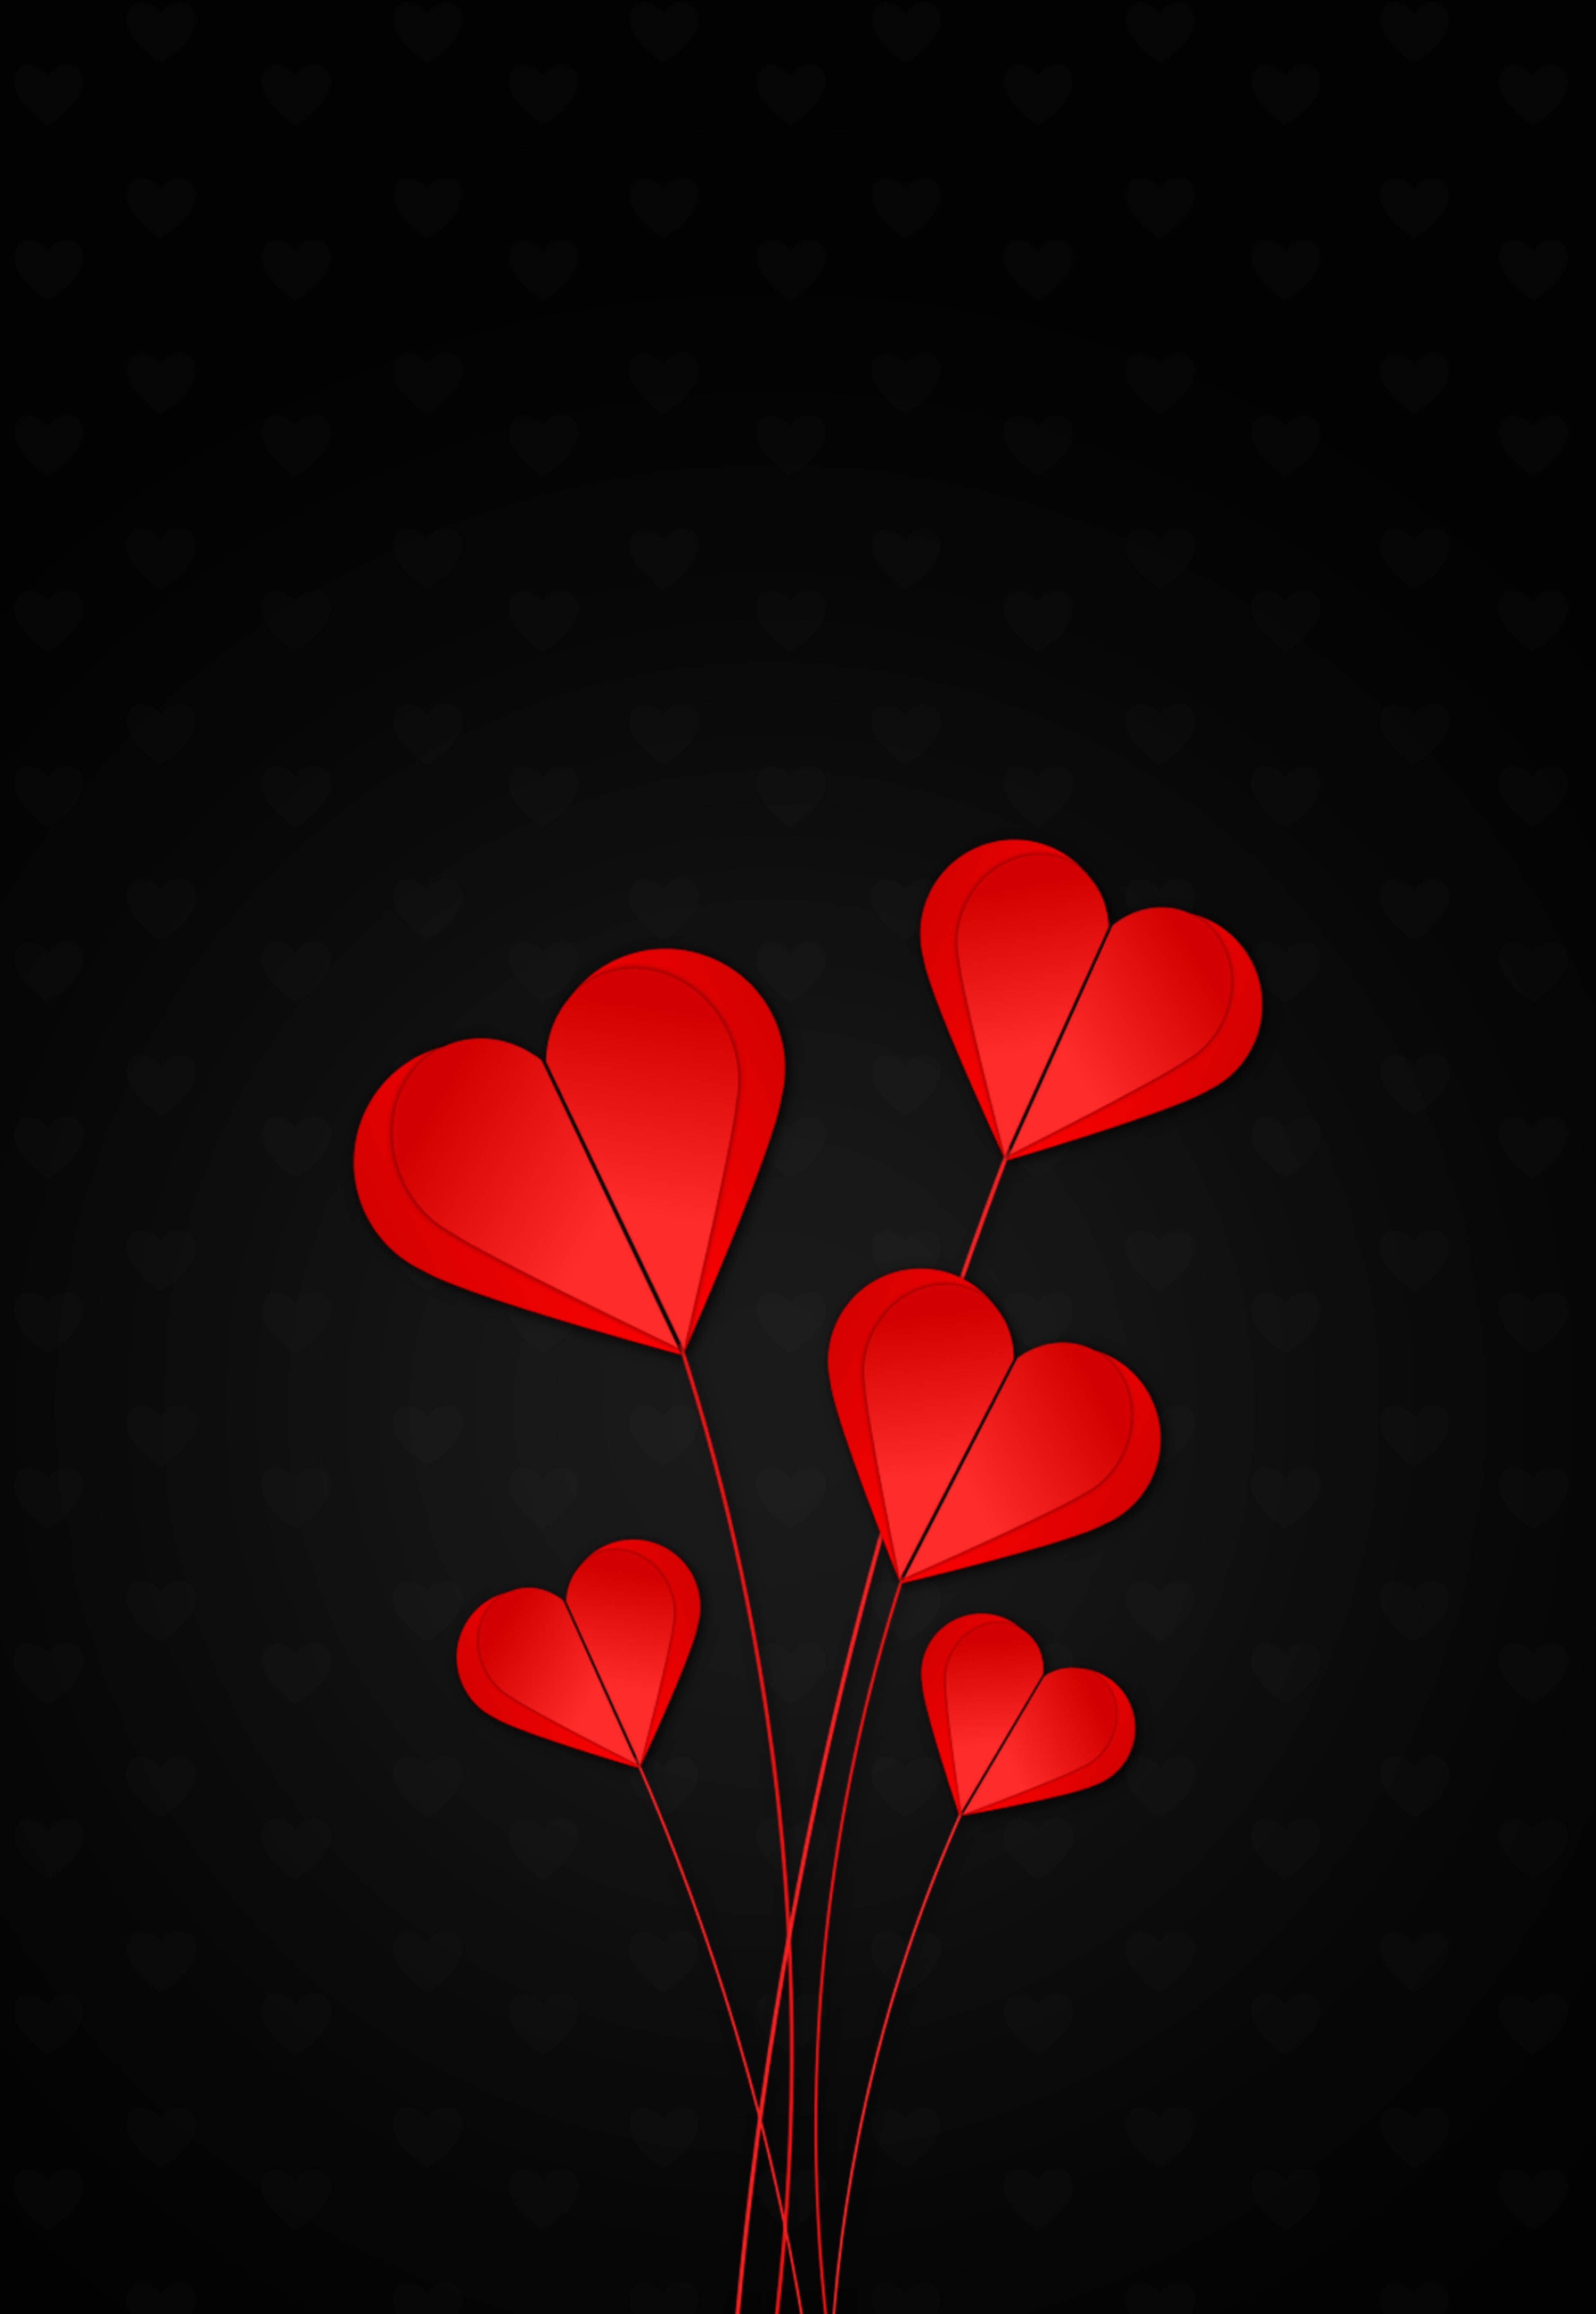 hearts, love, black background, red